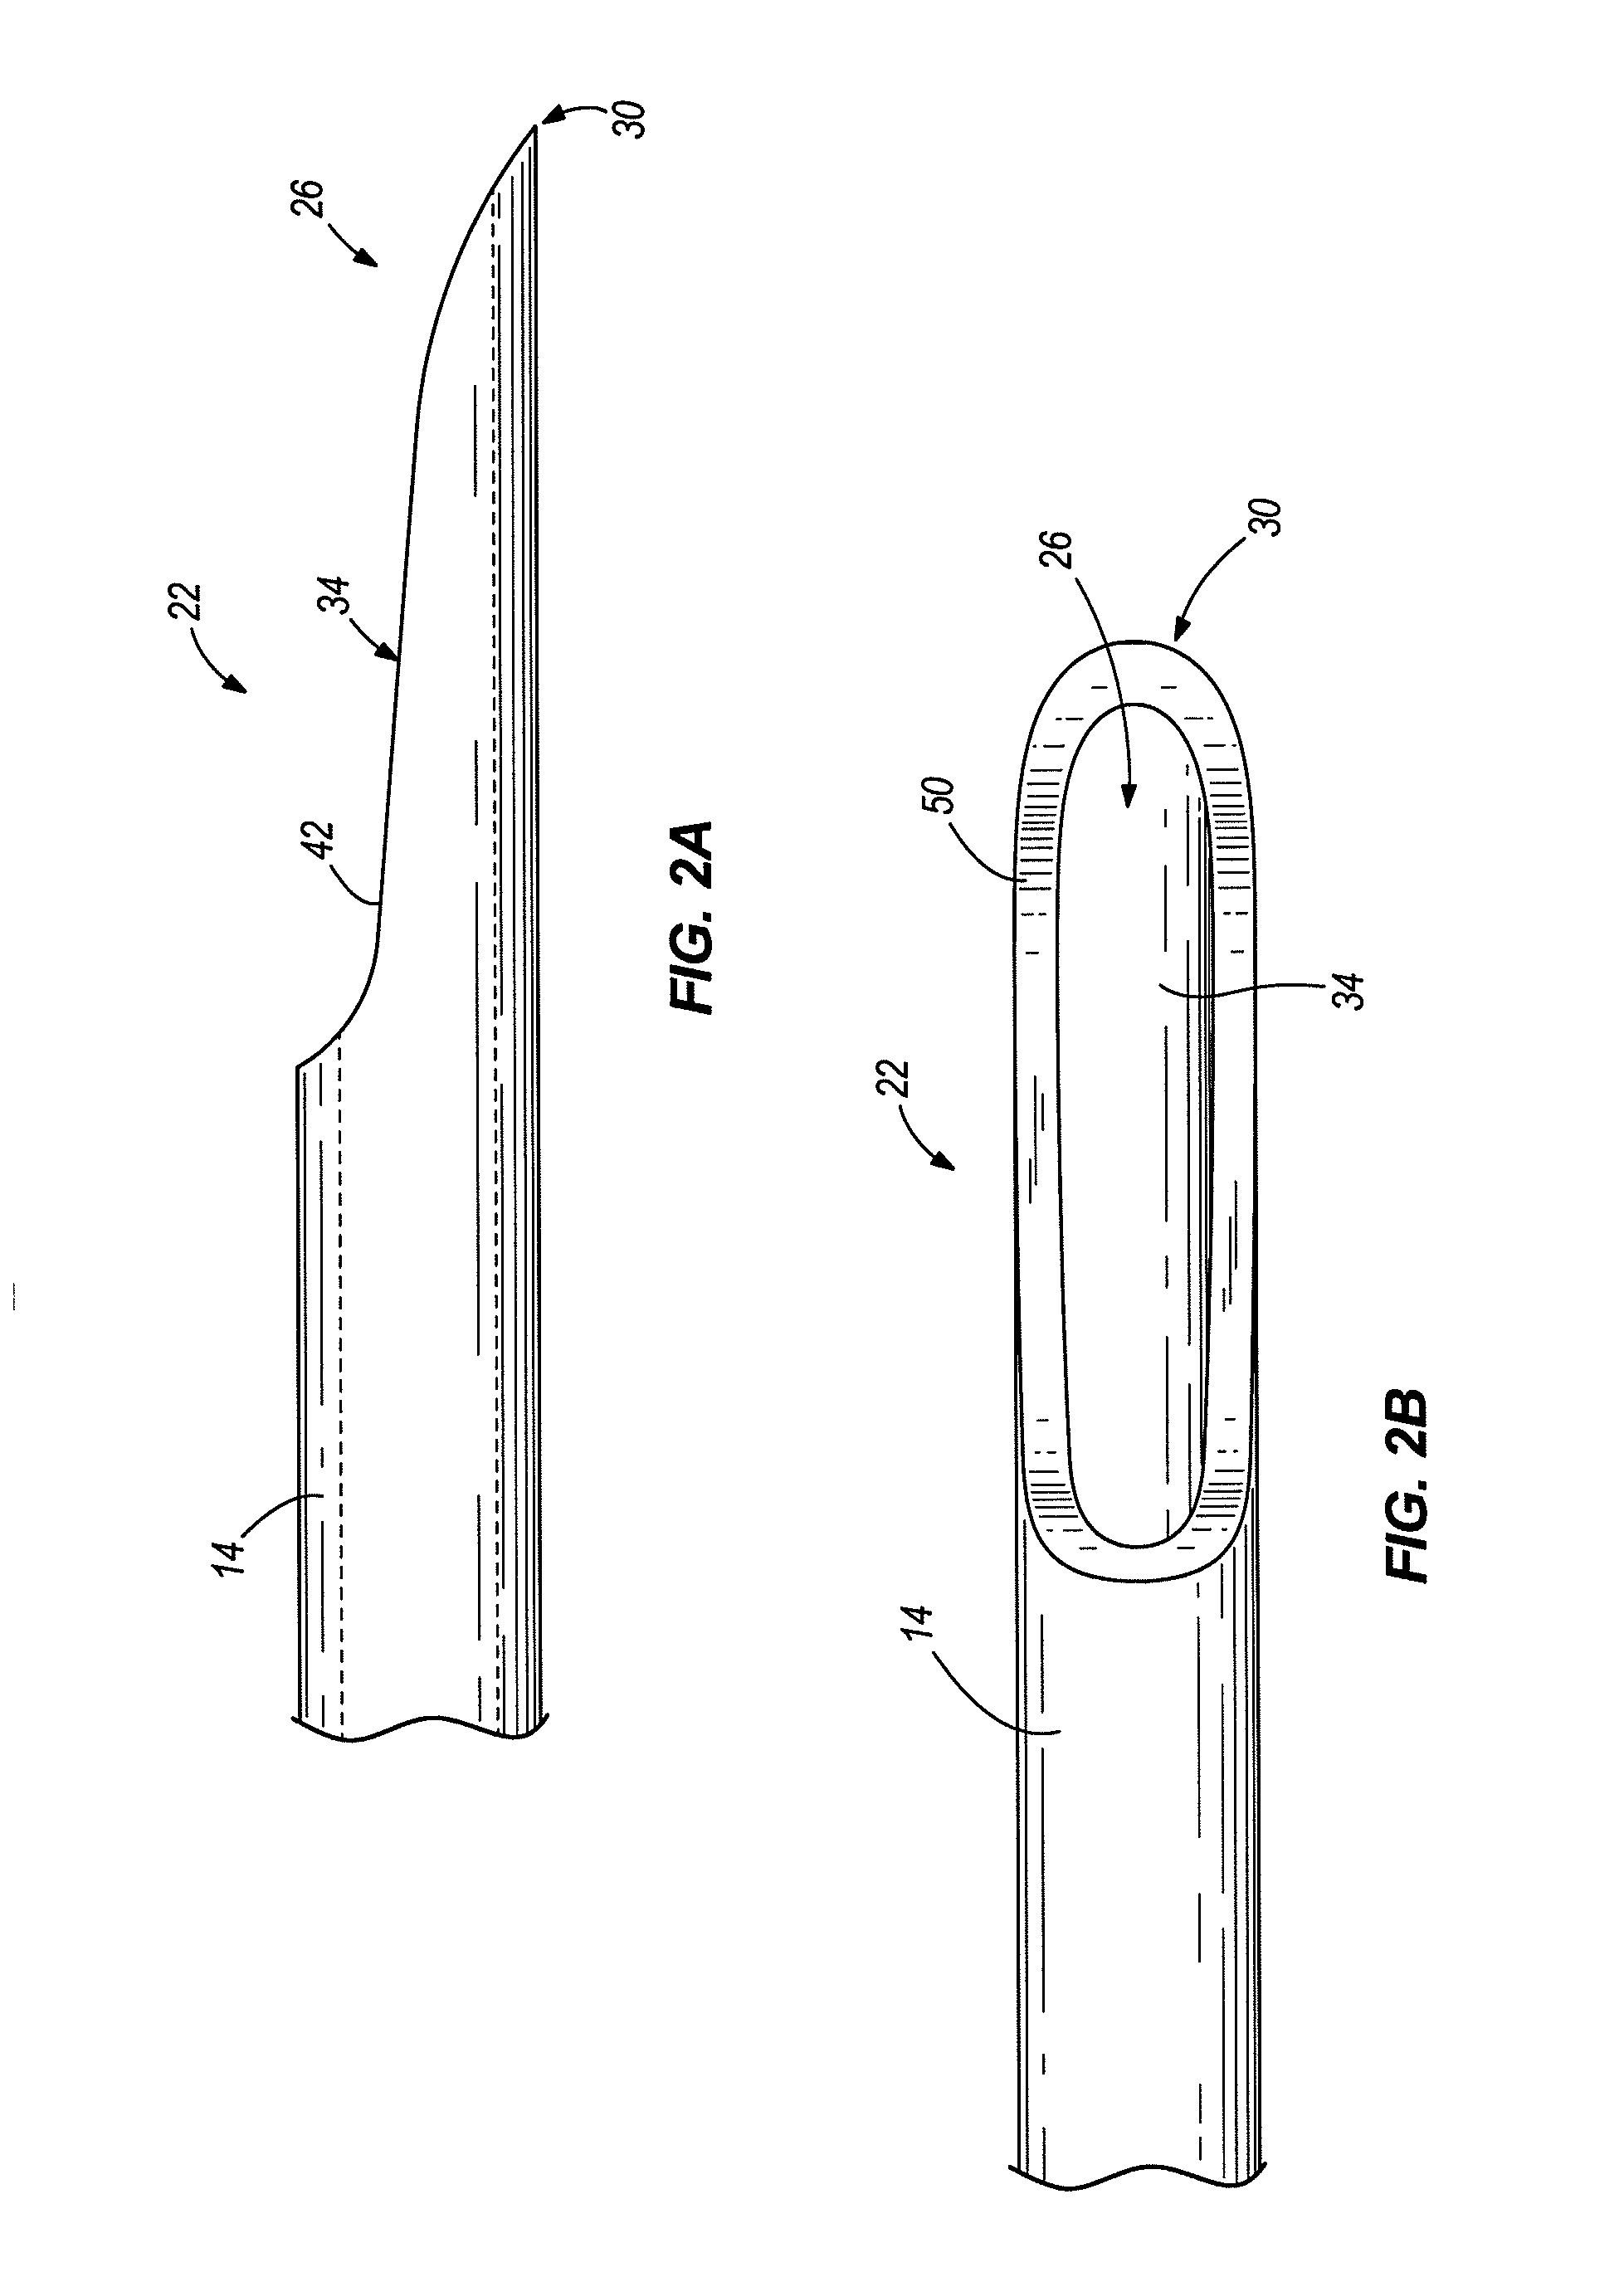 Insertion apparatus having a concave surface